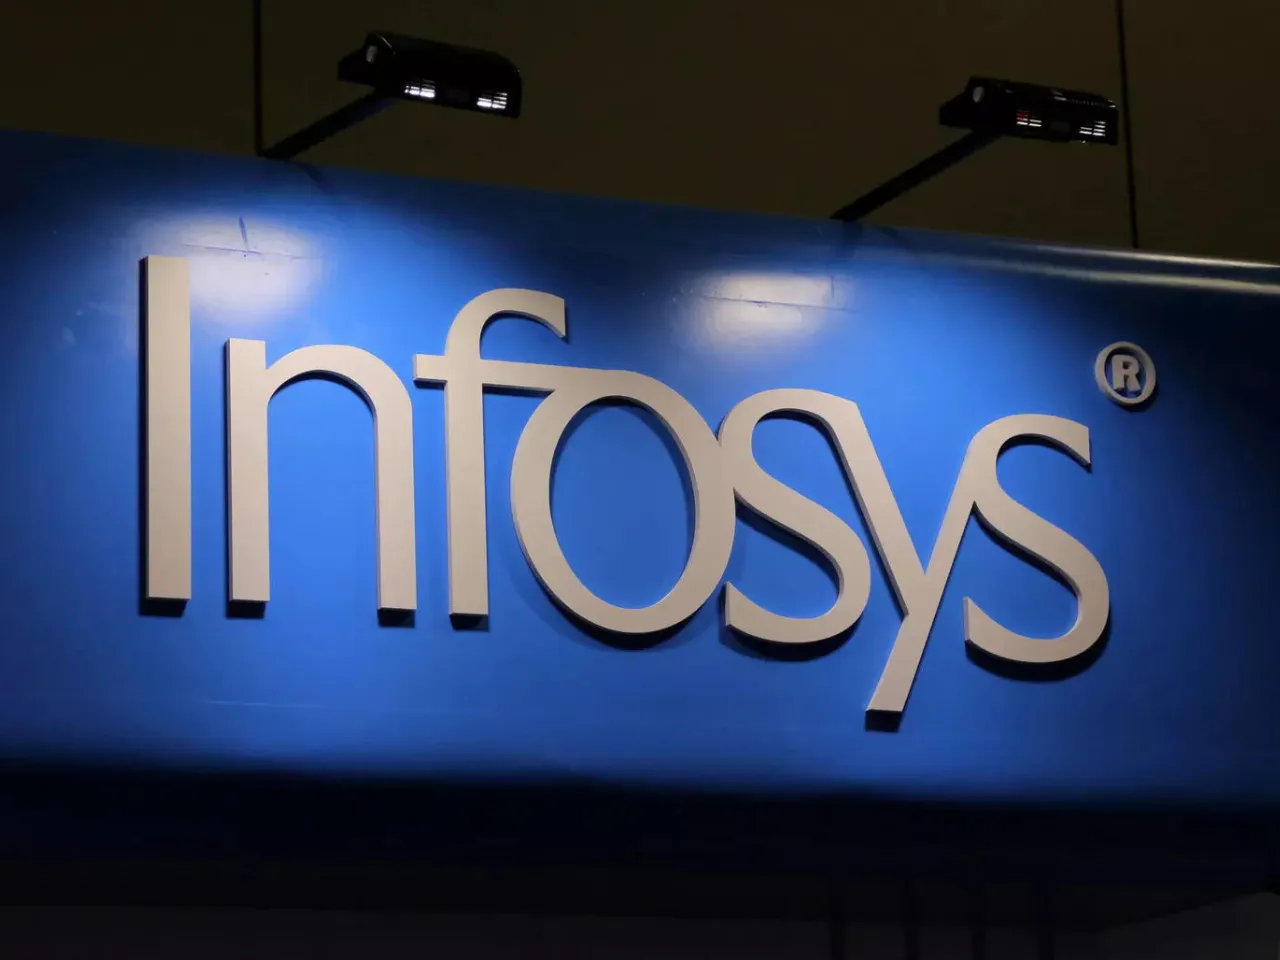 Infosys launches Industry Cloud to catalyse digital transformation of the commercial airline industry